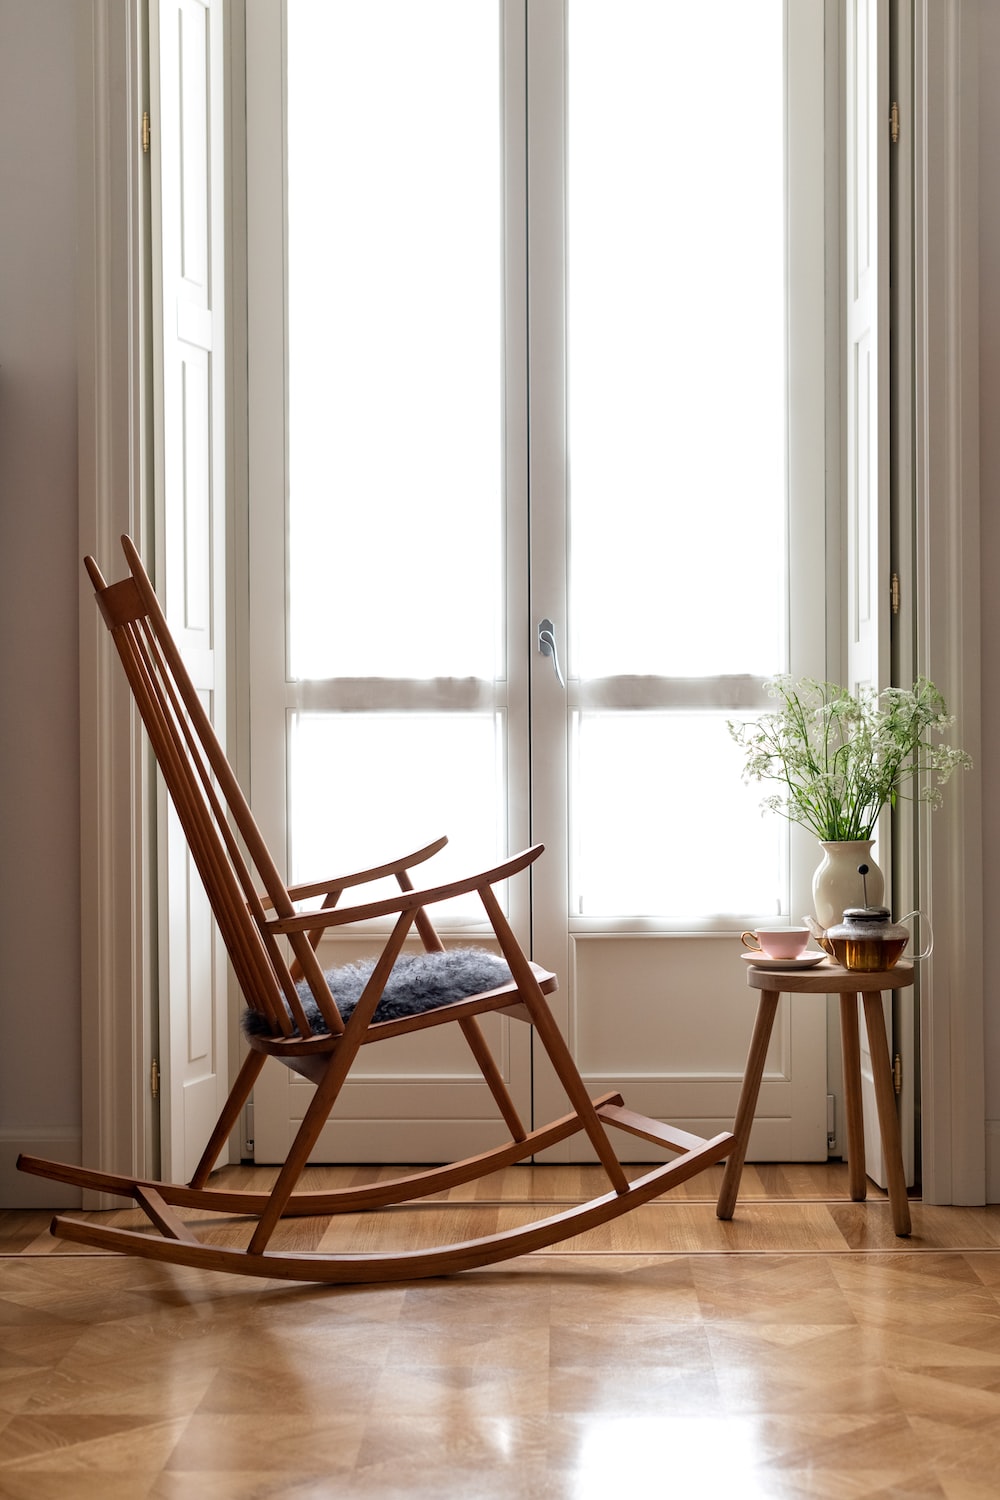 Rocking Chair Picture. Download Free Image